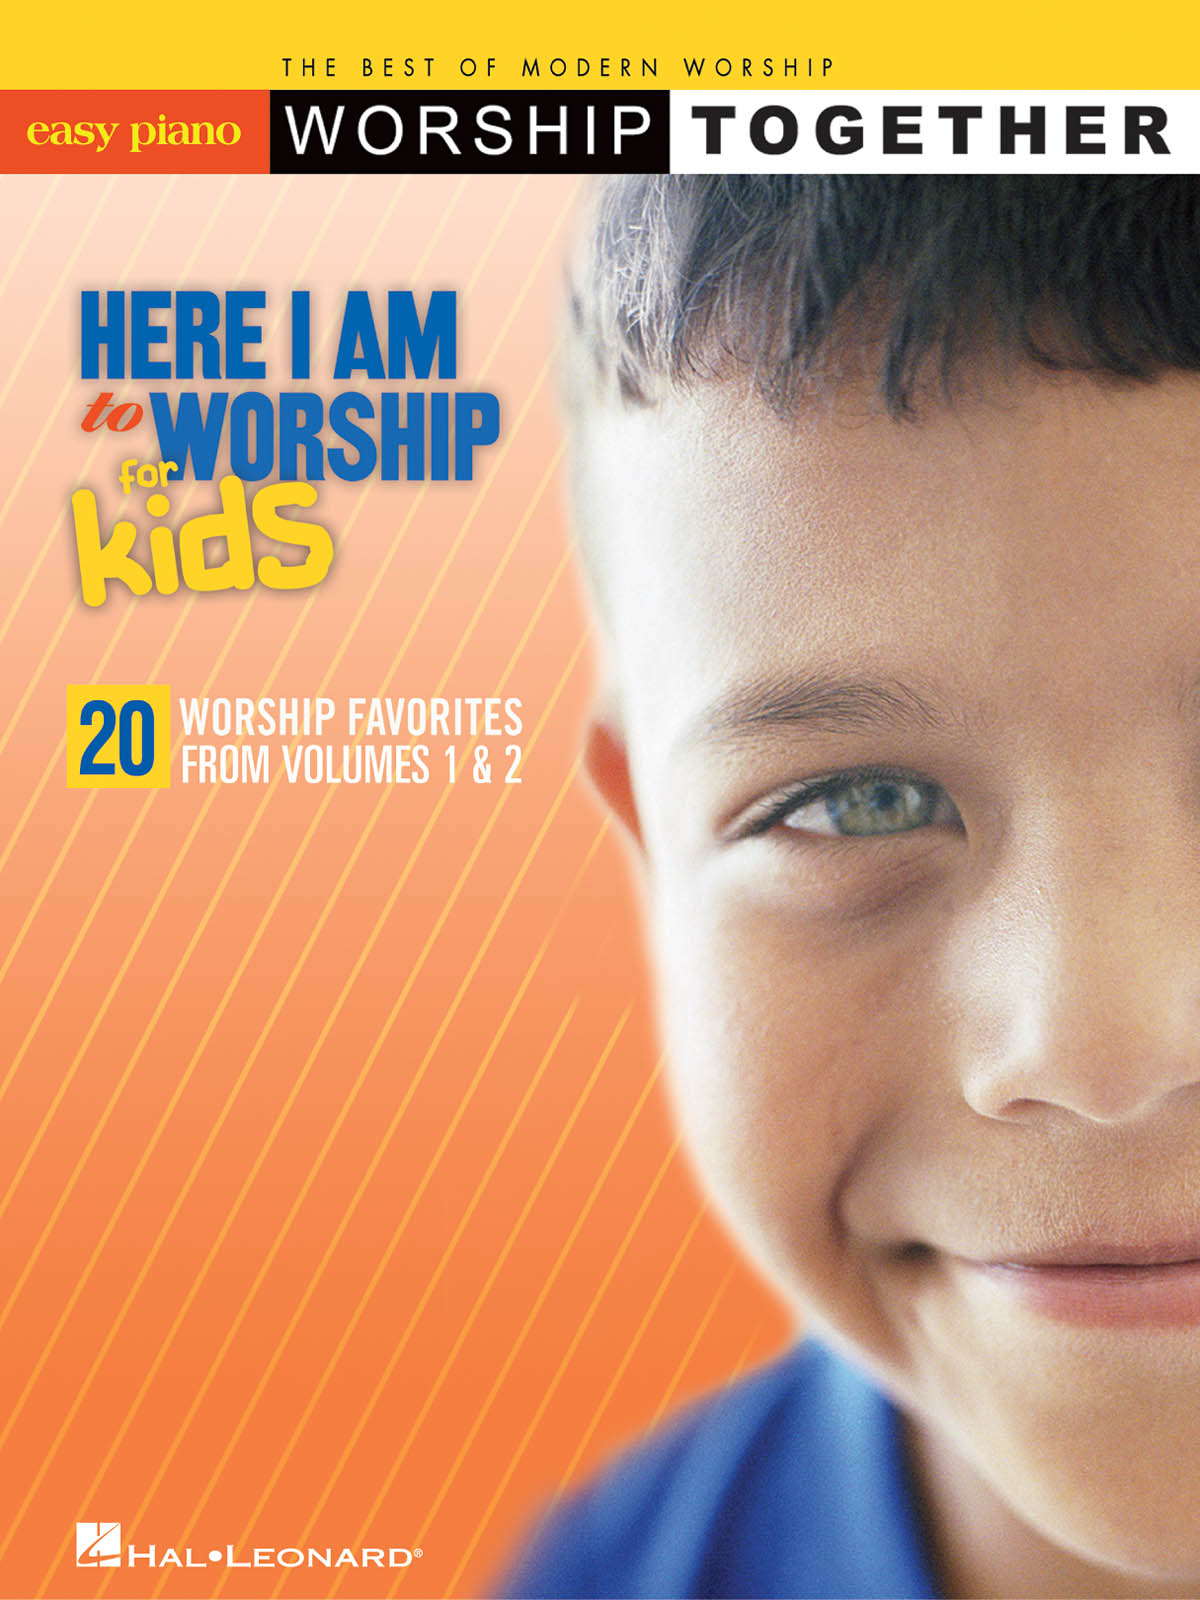 Here I Am to Worship for Kids - Volume 1